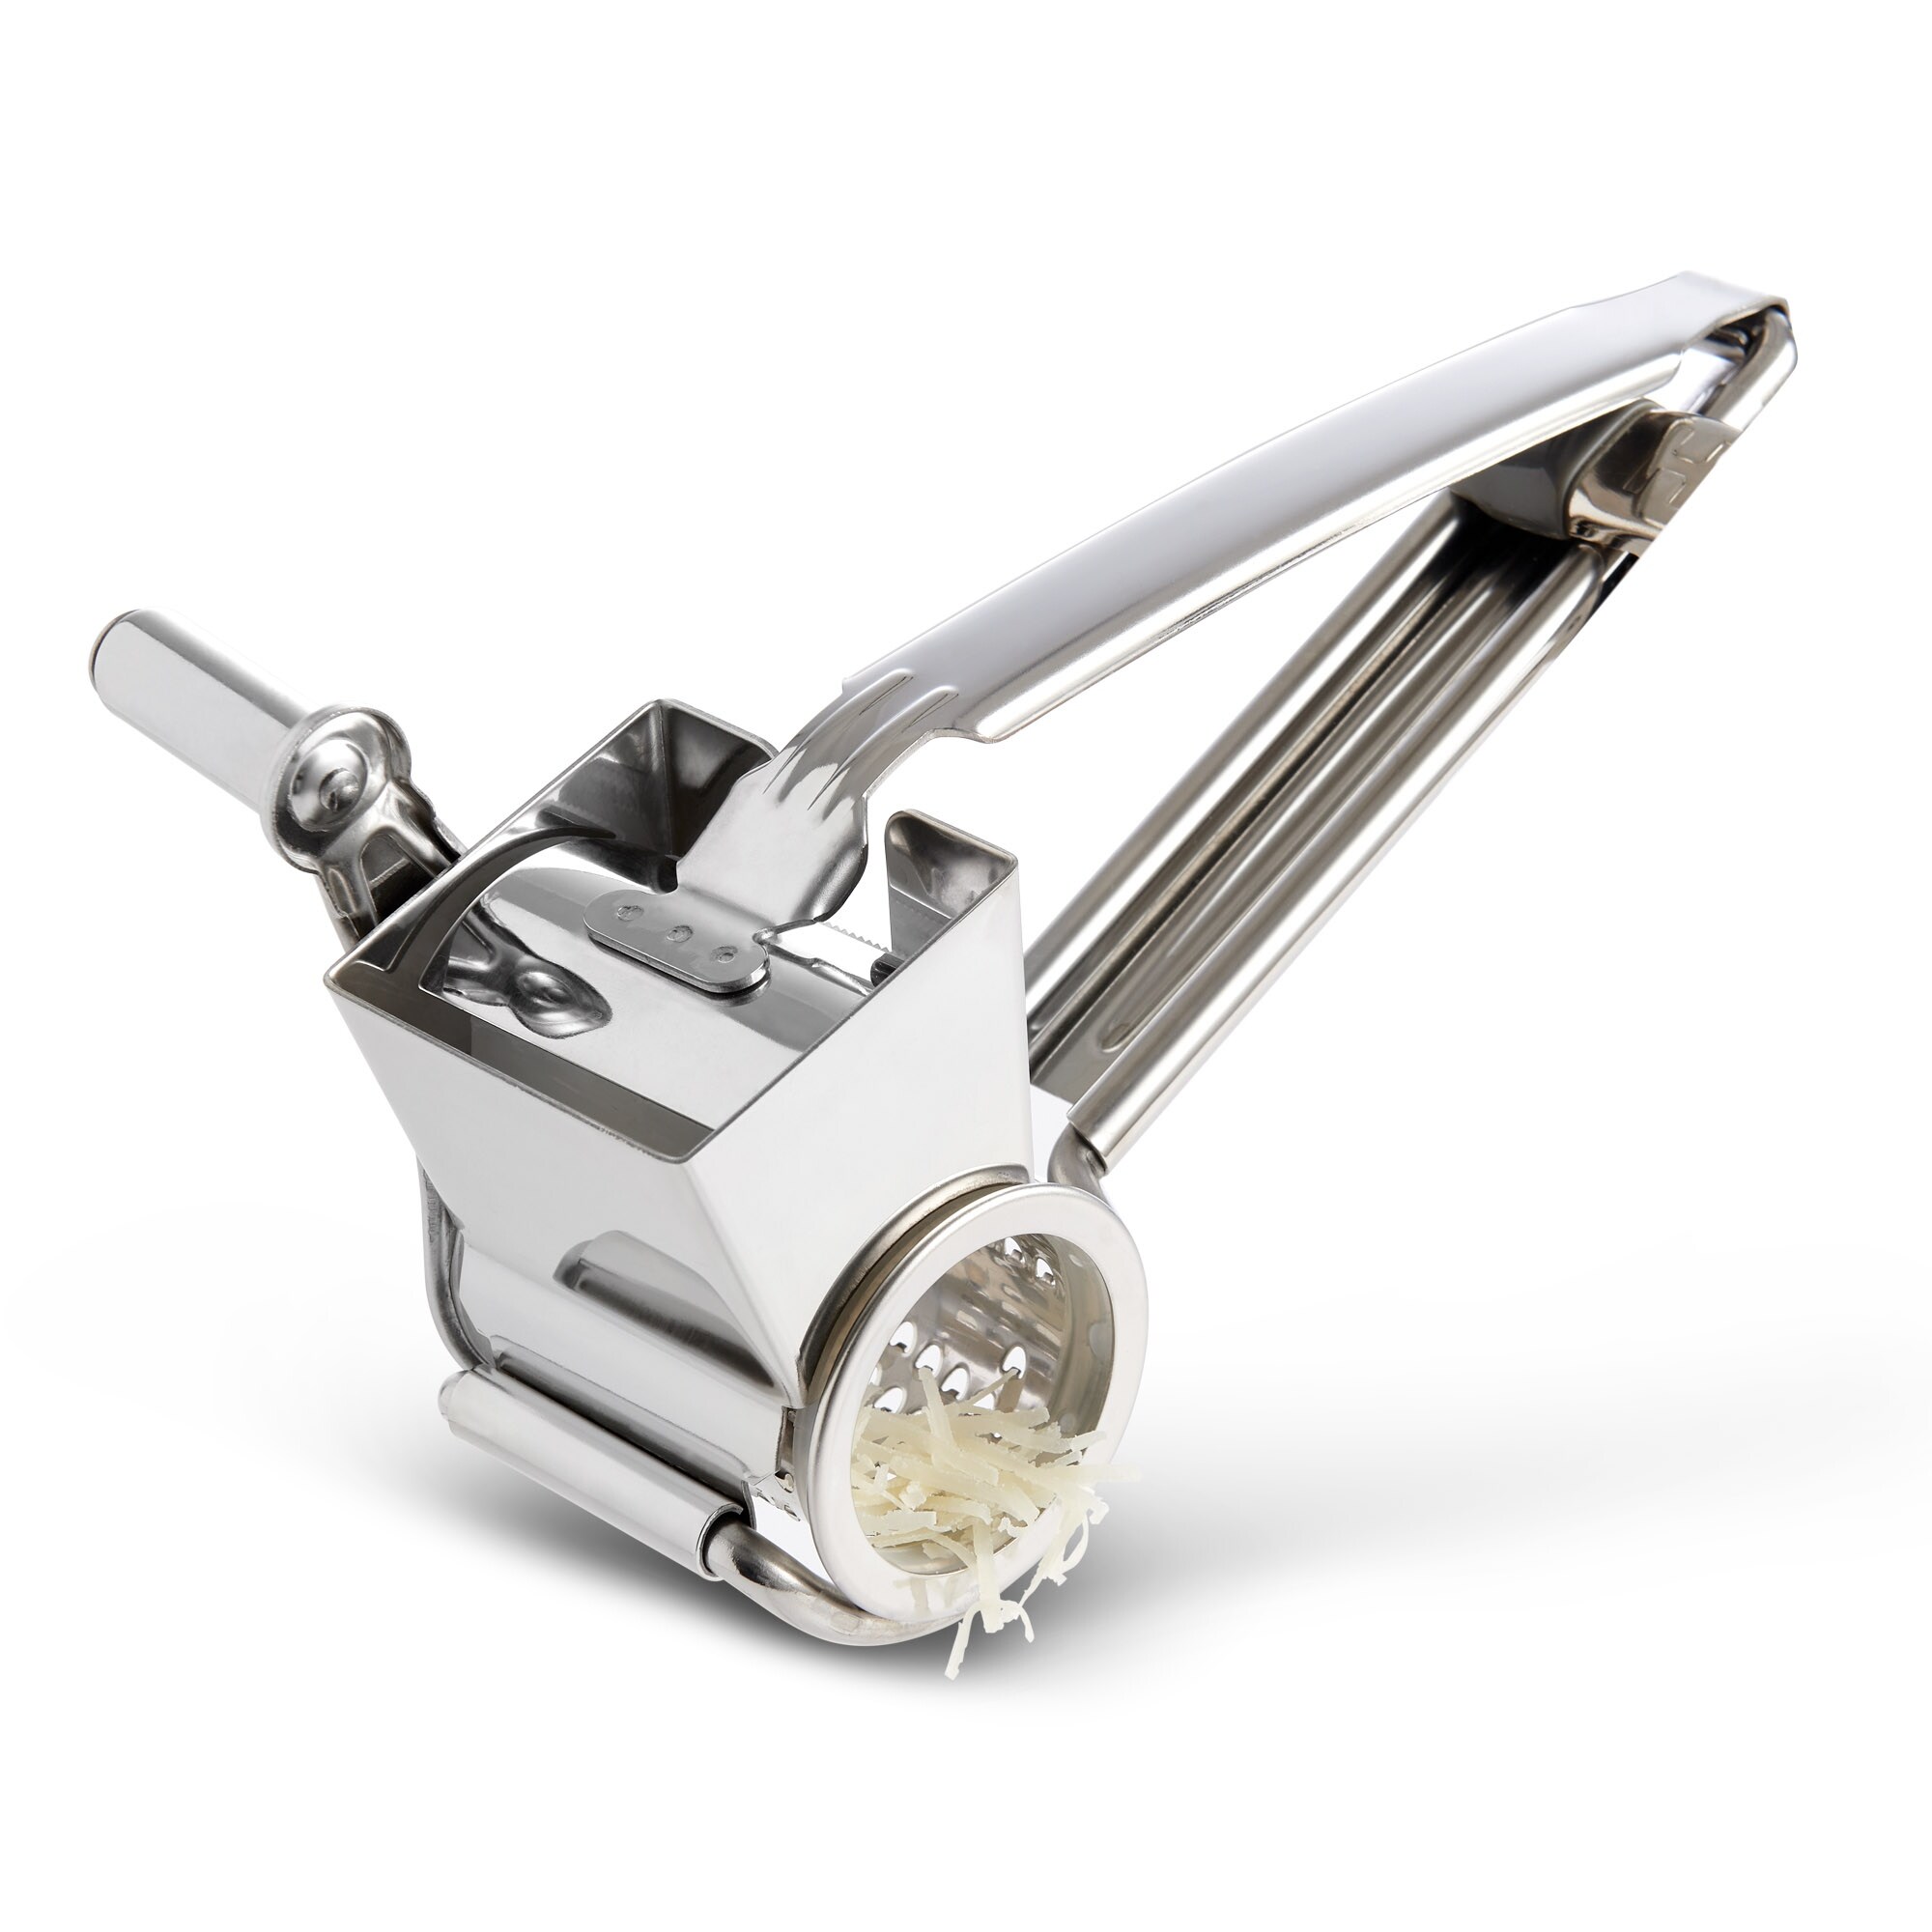 Fante's Rotary Cheese Grater, 18/8 Stainless Steel, The Italian Market  Original since 1906 